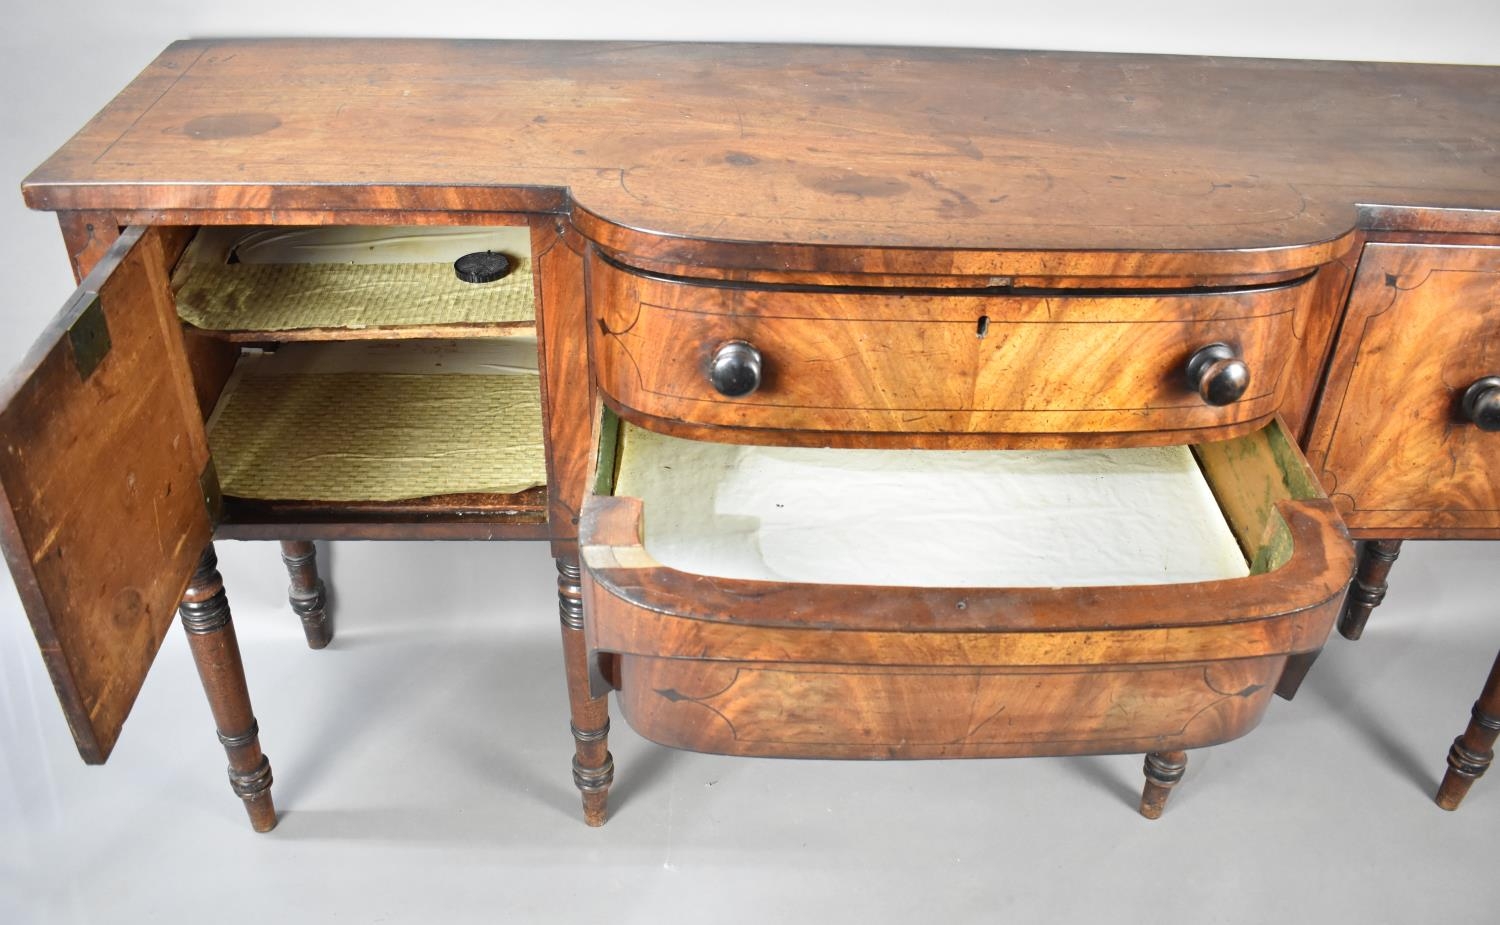 A 19th Century Reverse Breakfront Mahogany Sideboard with String Inlay, Raised on Turned Supports - Image 2 of 4